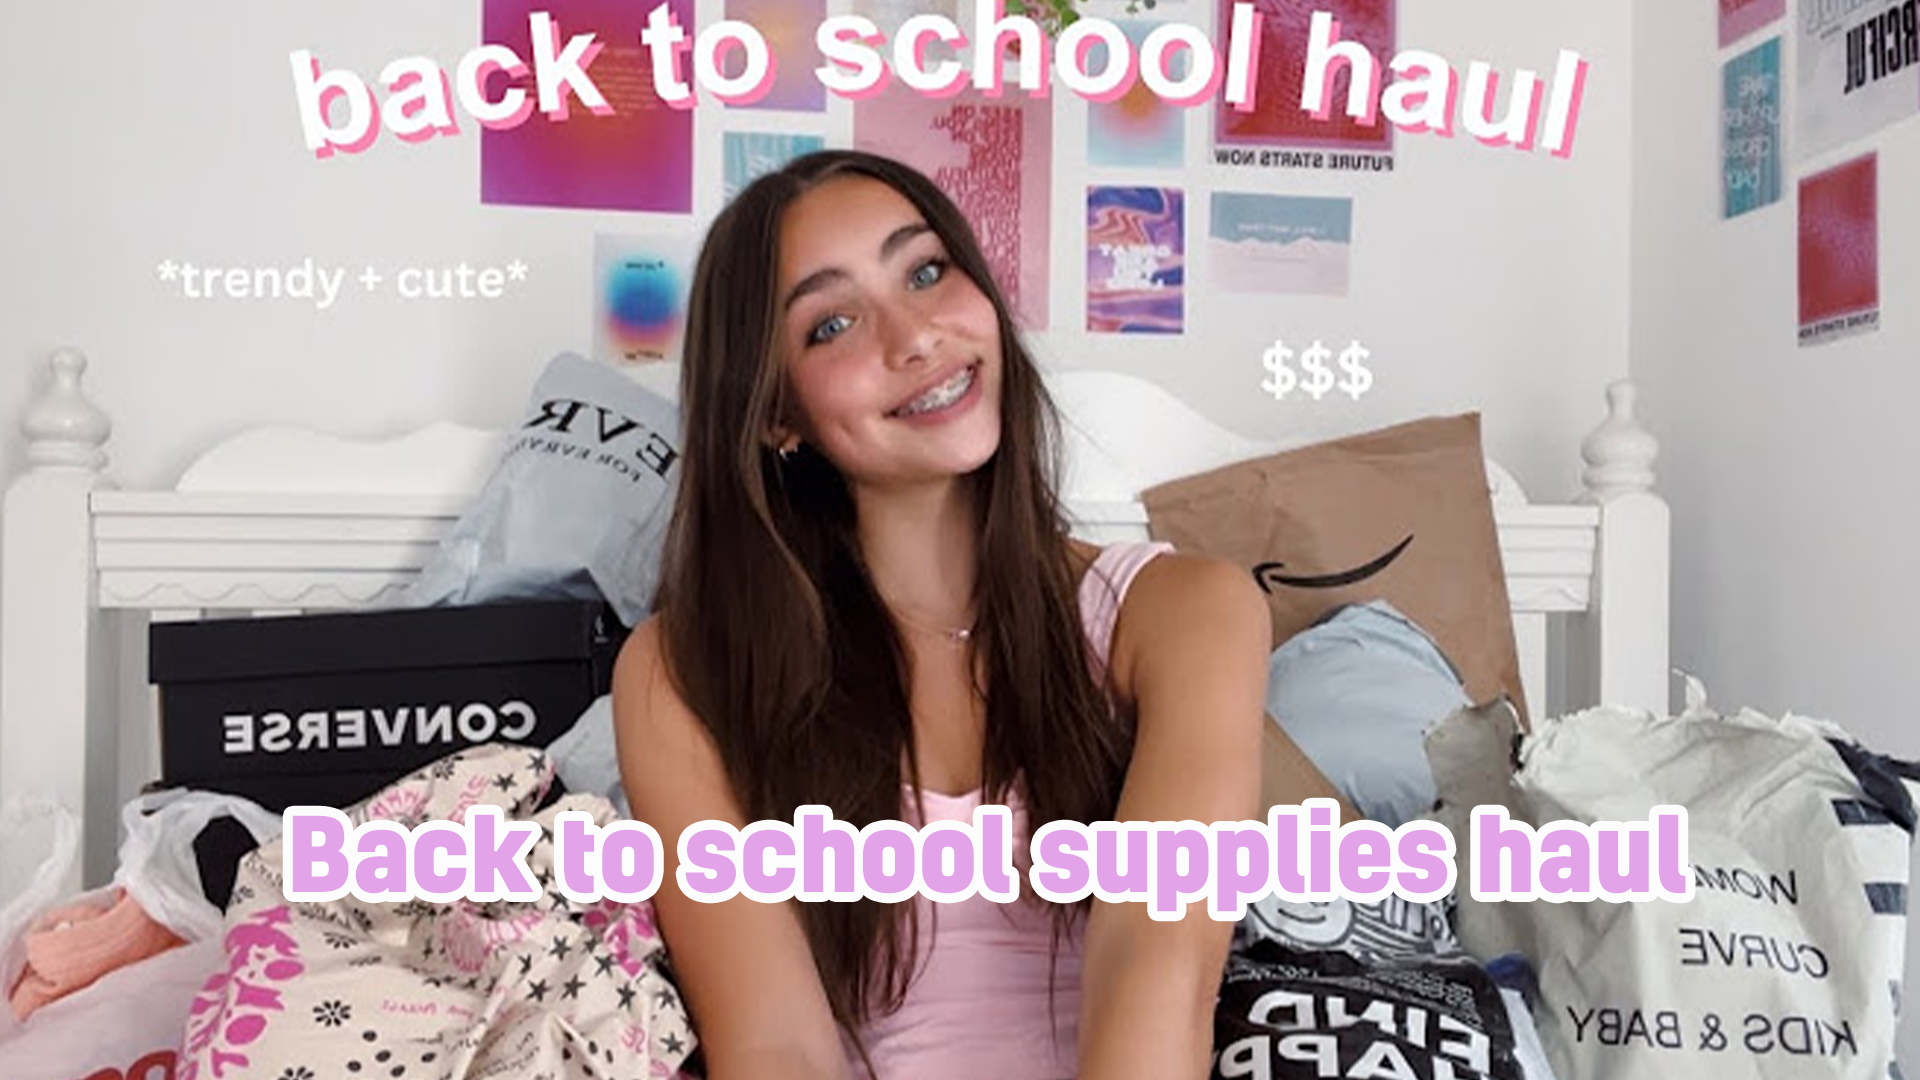 You're a sucker for a haul video, so how about this school supplies one? Noelle Kate gives us the lowdown on what she's got for back to school season!